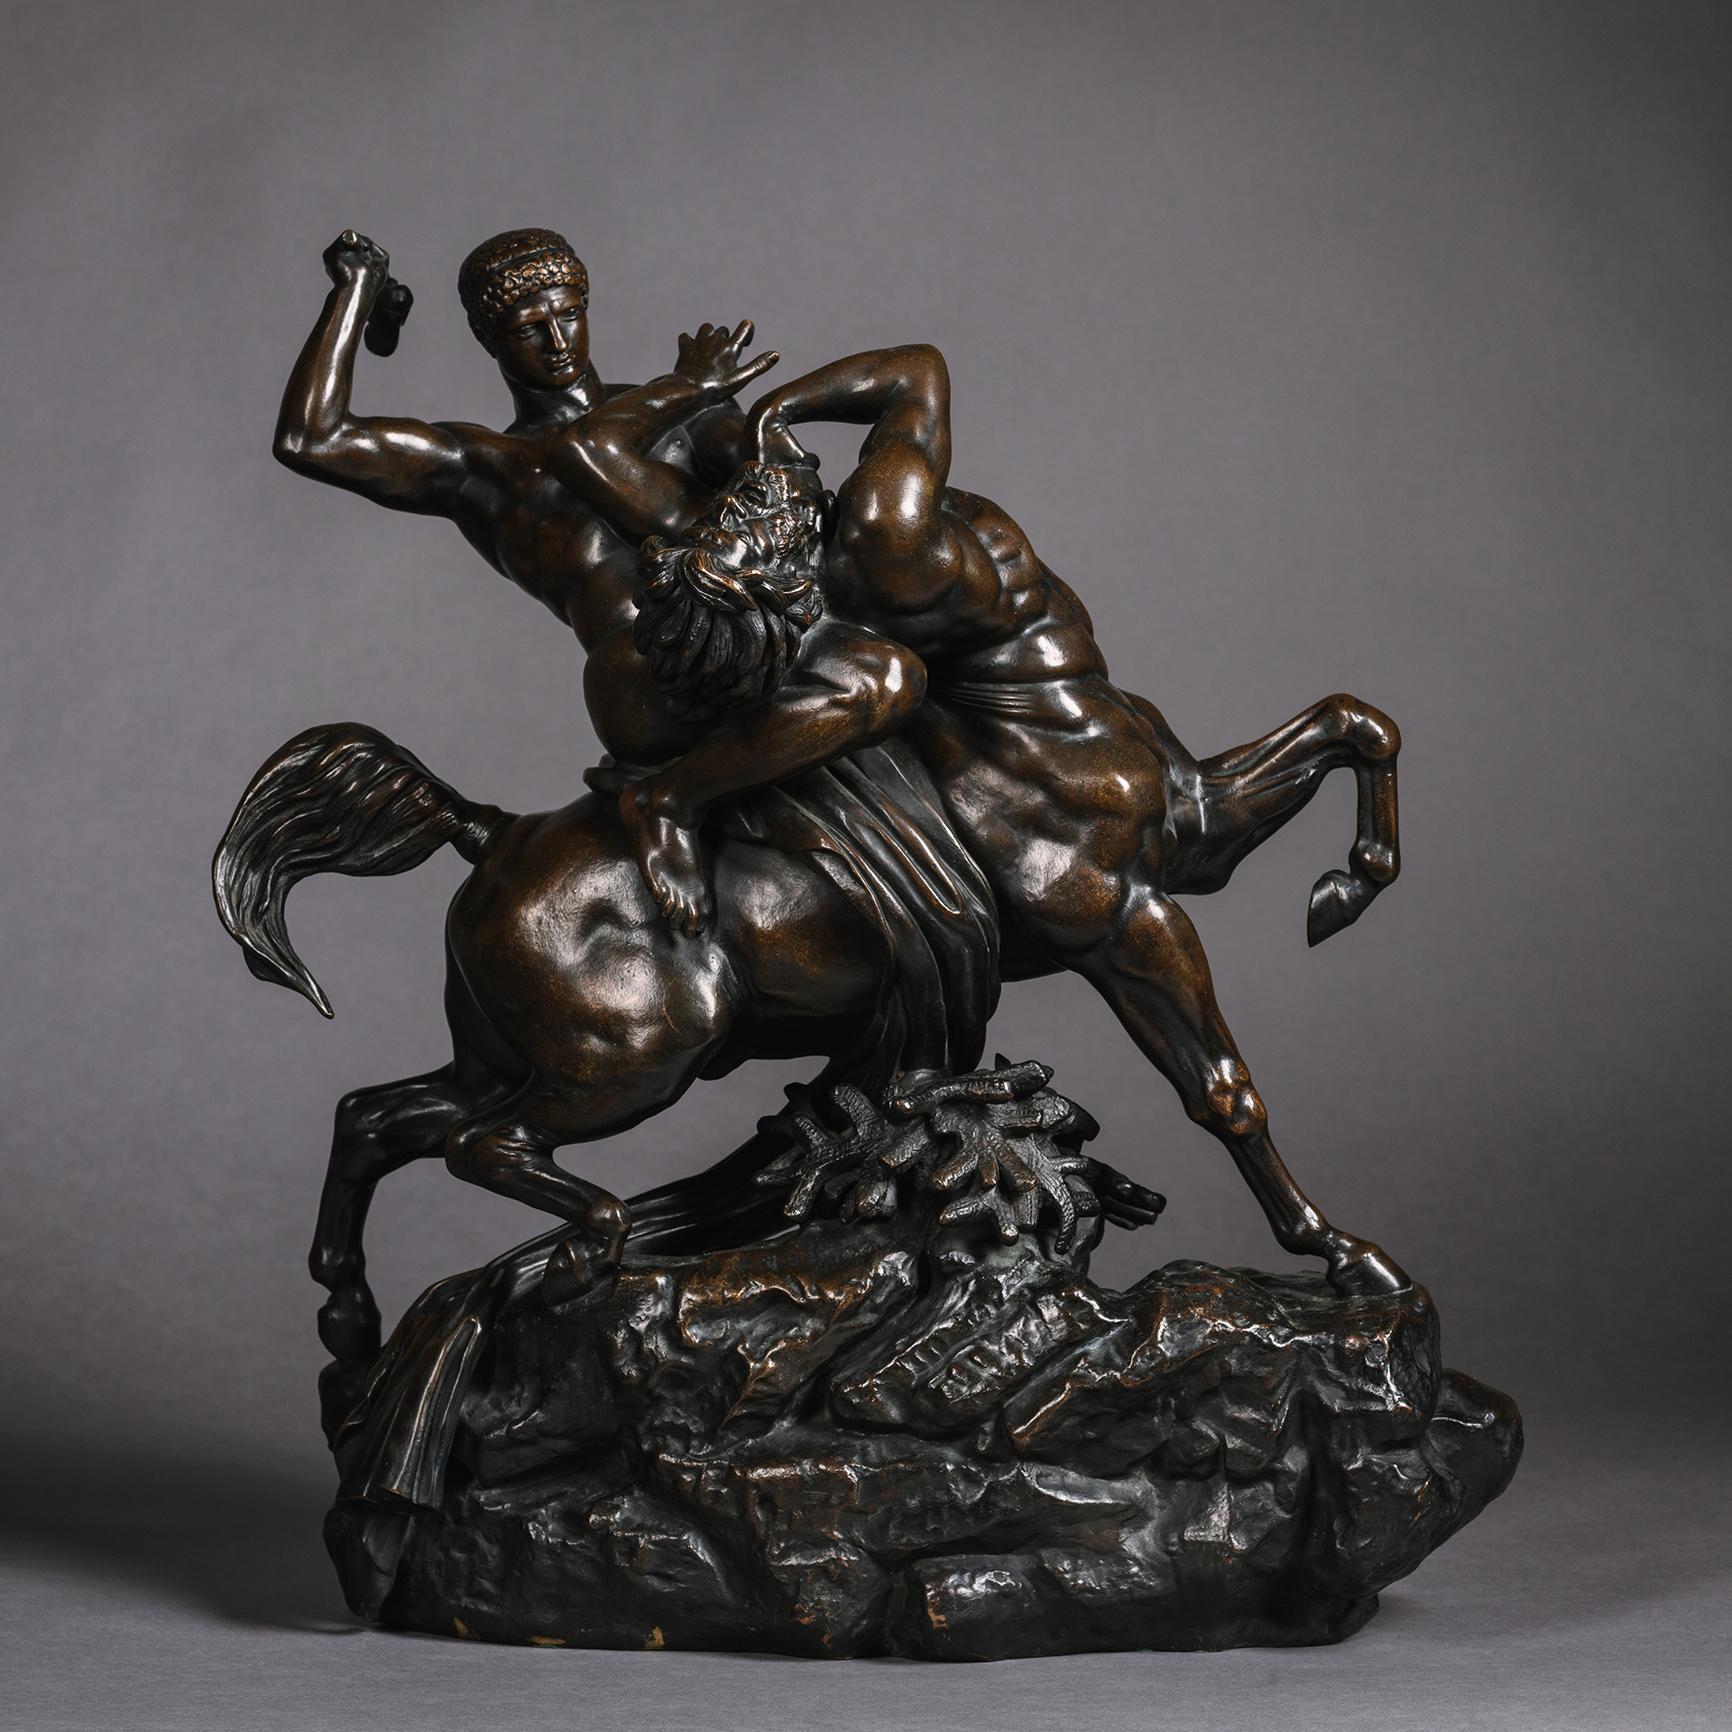 A Fine Patinated Bronze Group, Entitled 'Thesée Combattant le Centaure Bianor' ('Theseus Fighting the Centaur Bianor'), Cast by Ferdinand Barbedienne, From the Model By Antoine Louis Barye (1795-1875).

Signed 'A. L. BARYE' and stamped 'F.